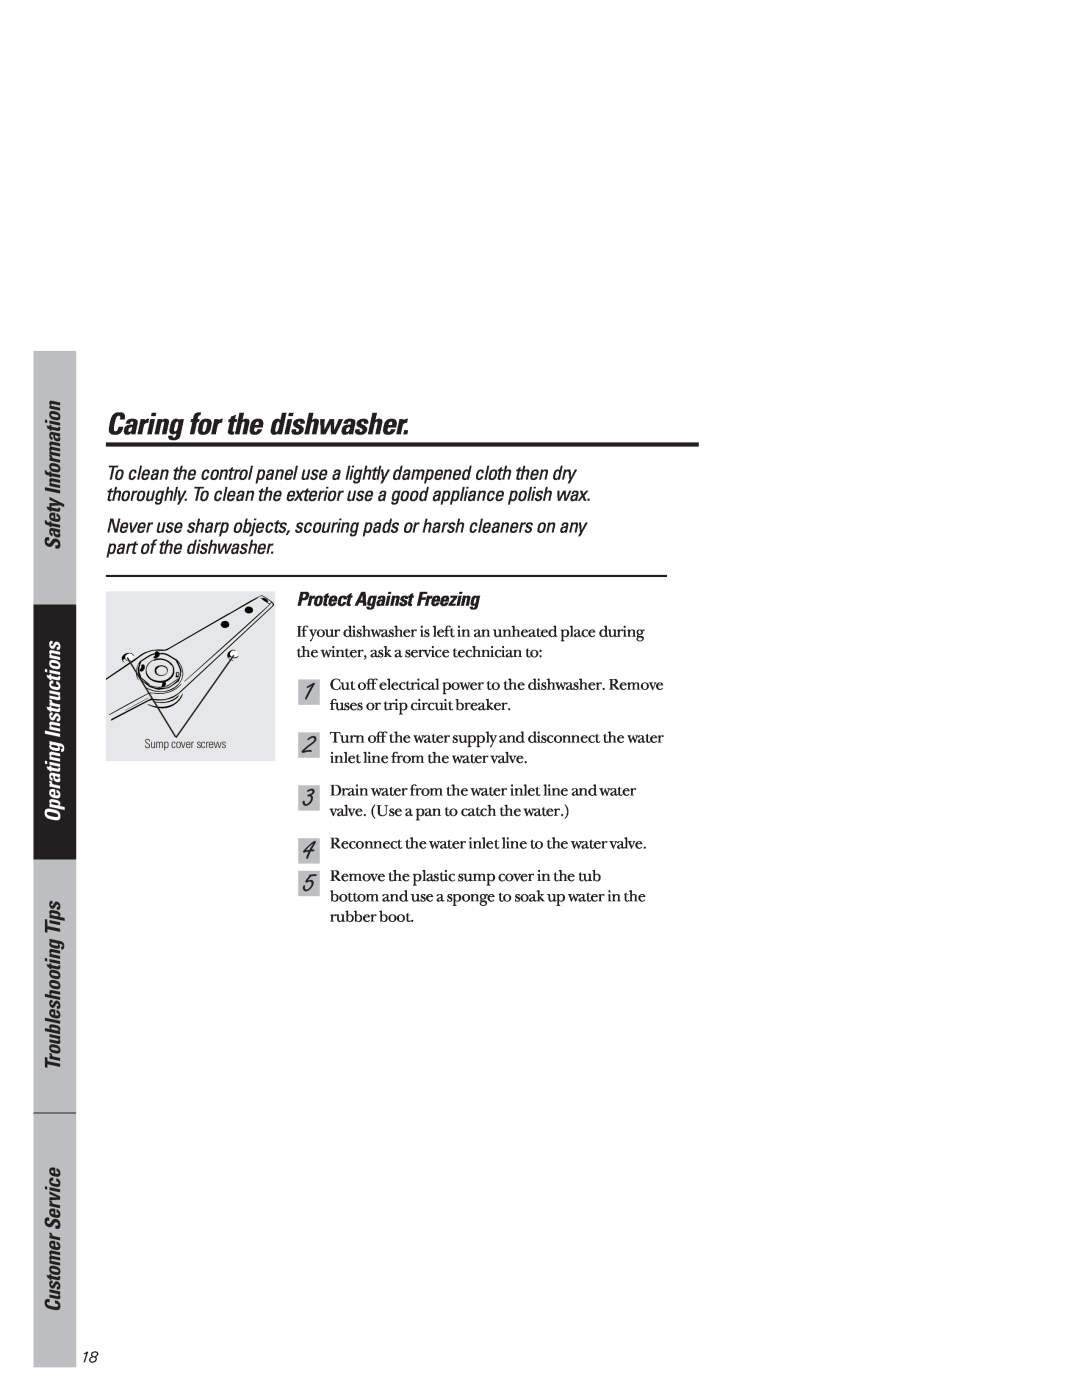 GE GSD4610 owner manual Caring for the dishwasher, Protect Against Freezing, Safety Information, Operating Instructions 